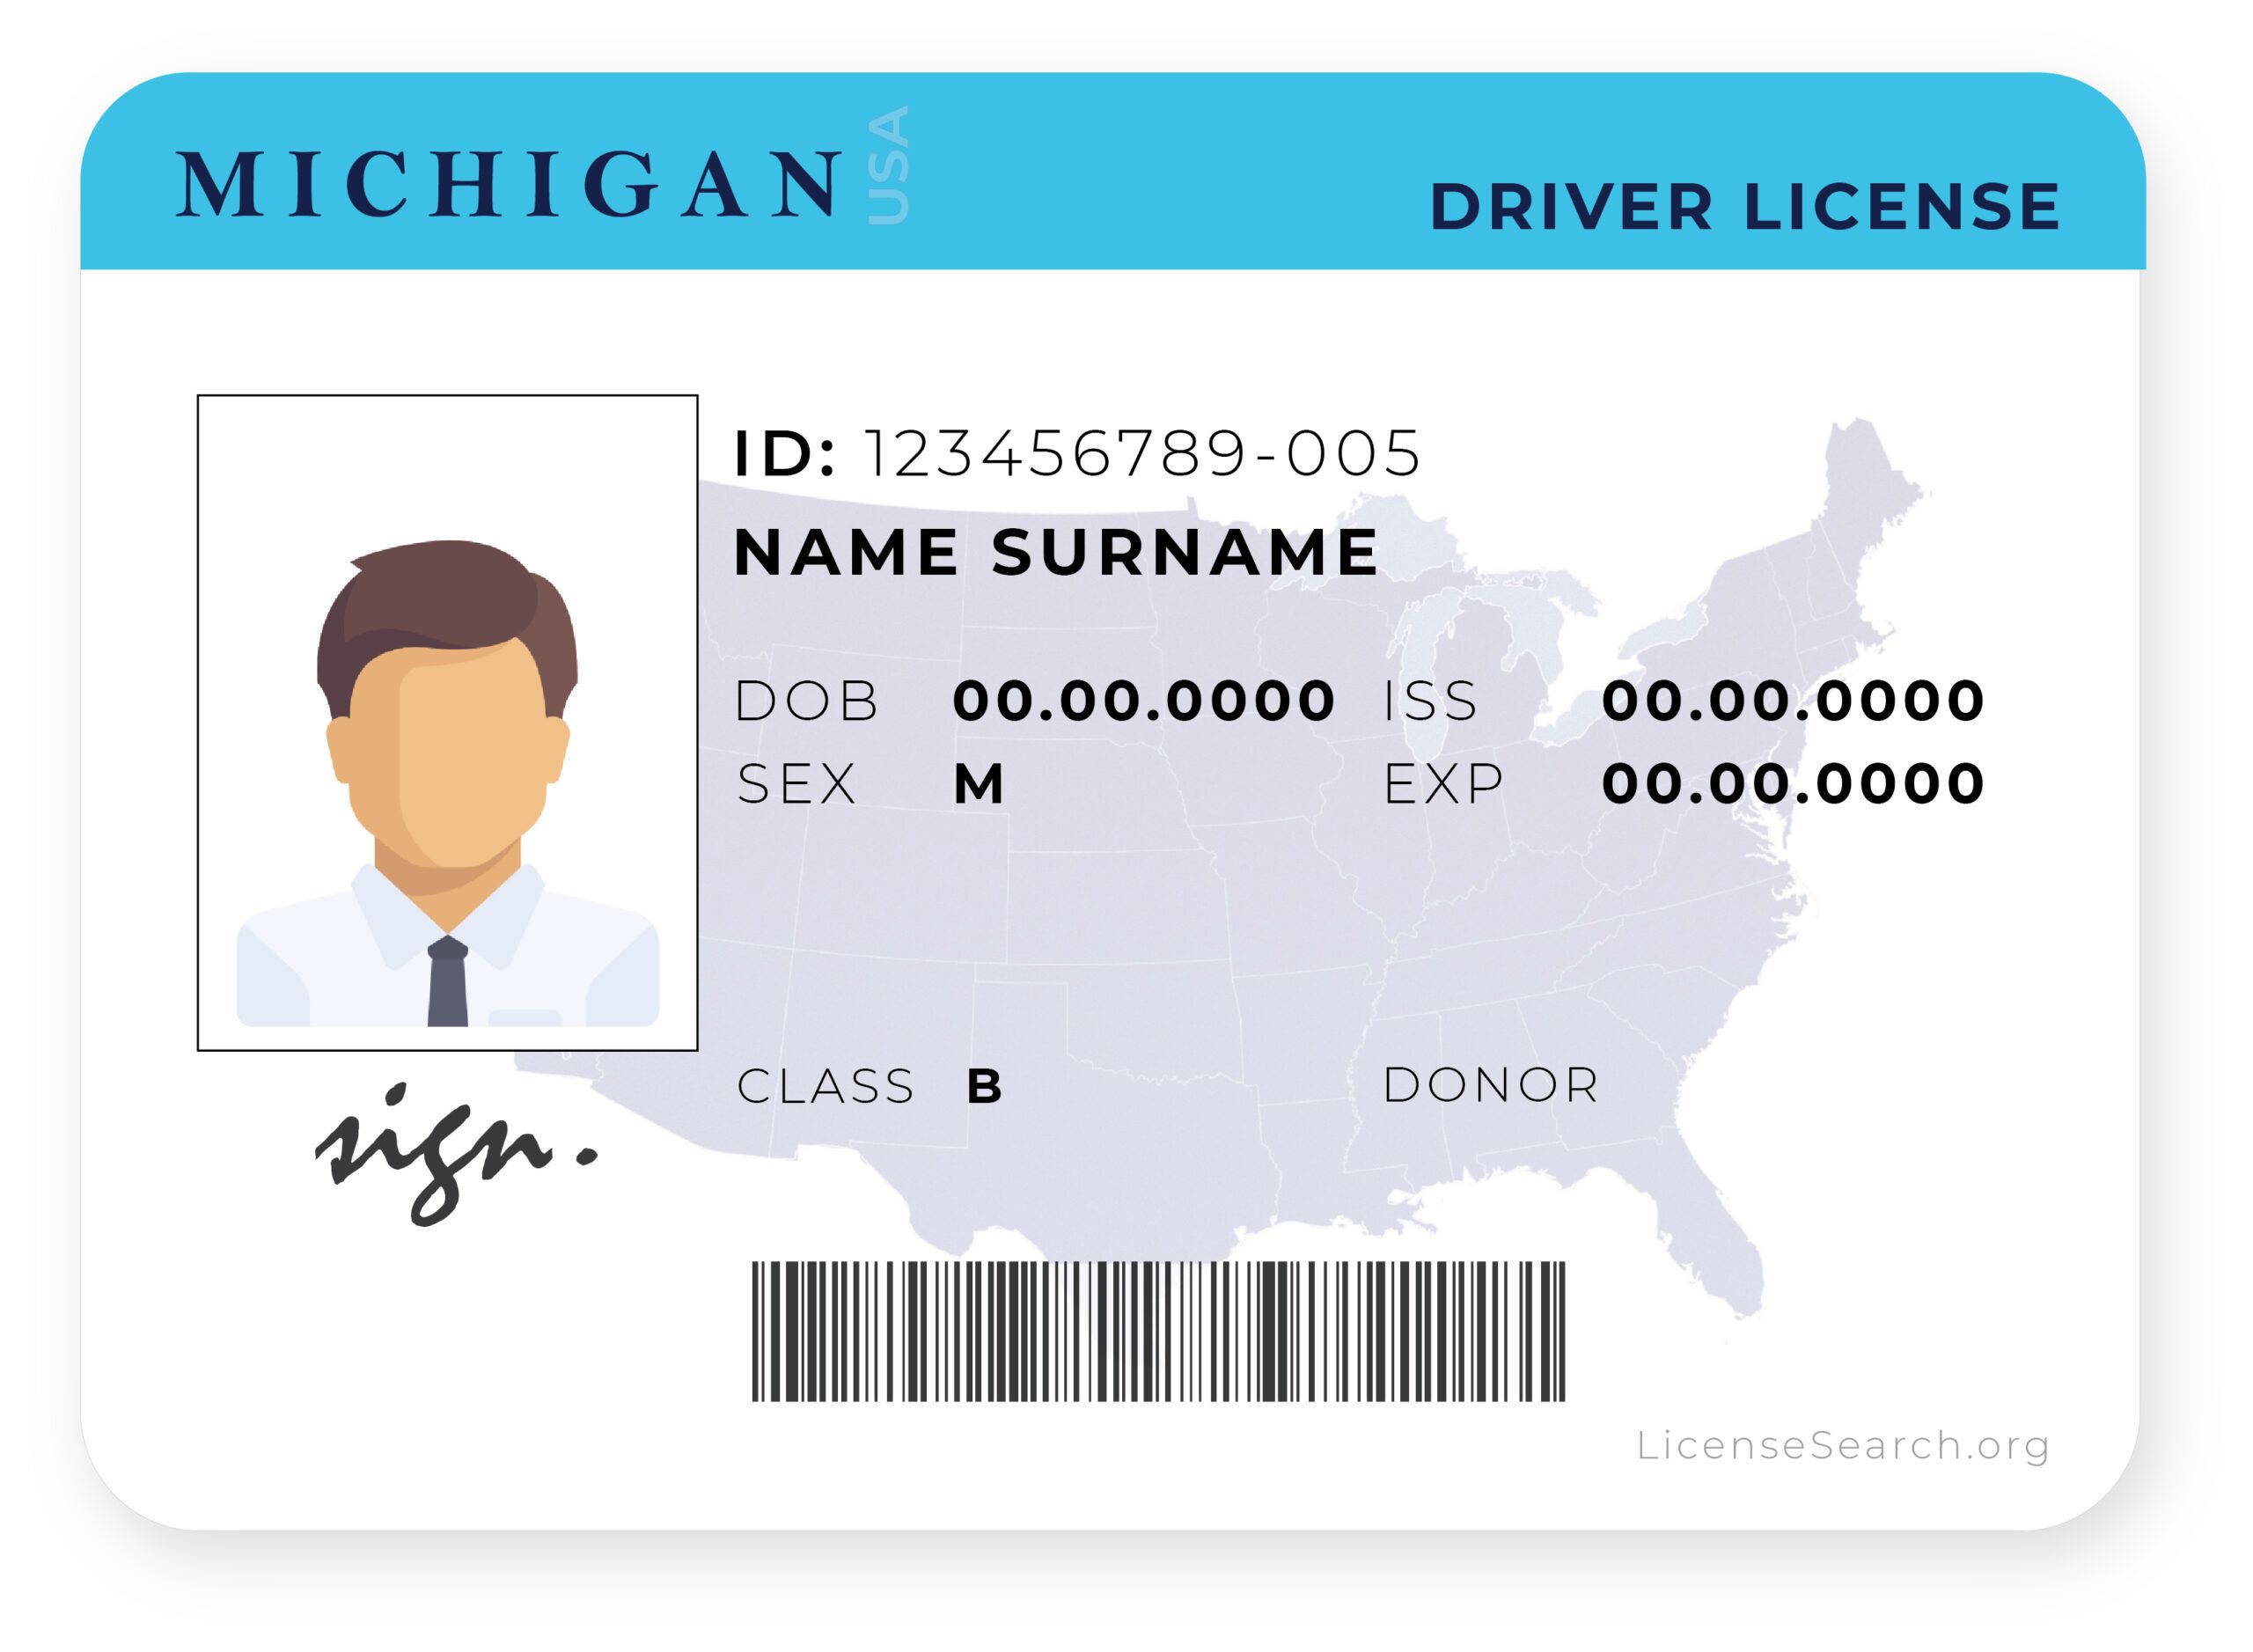 documents needed for michigan driver's license